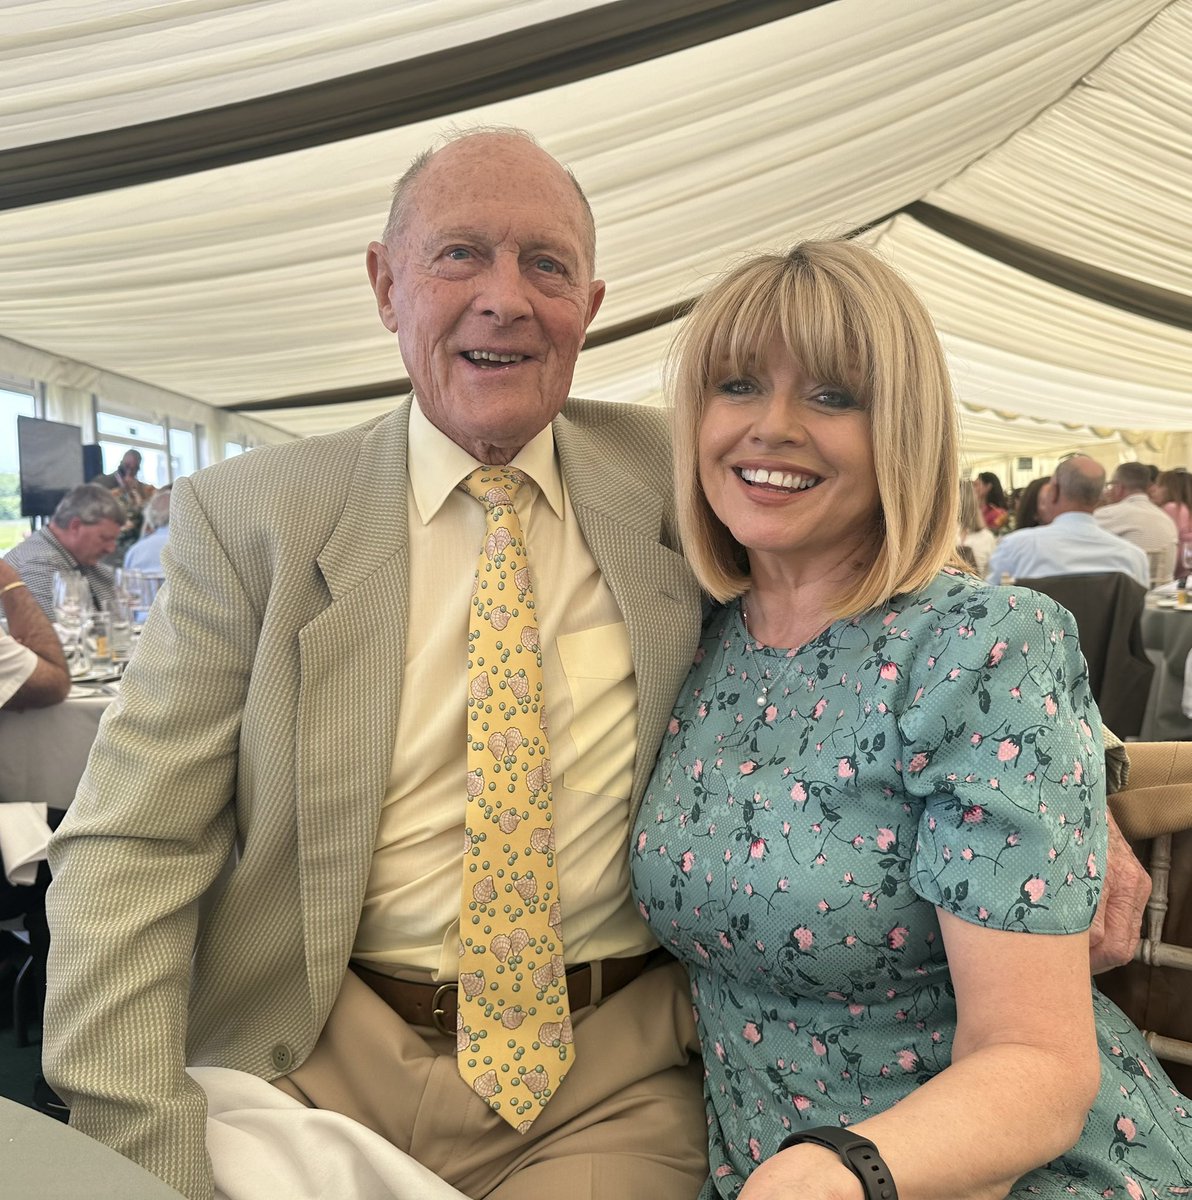 A fantastic afternoon at the first of this year’s Yorkshire Charity Clay Days in the company of cricket legend Sir Geoffrey Boycott @GeoffreyBoycott @DuncombePark Thousands raised for Yorkshire charities, with @duncanwoodtv as a fabulous MC. Great to meet @lucypittawayart too!